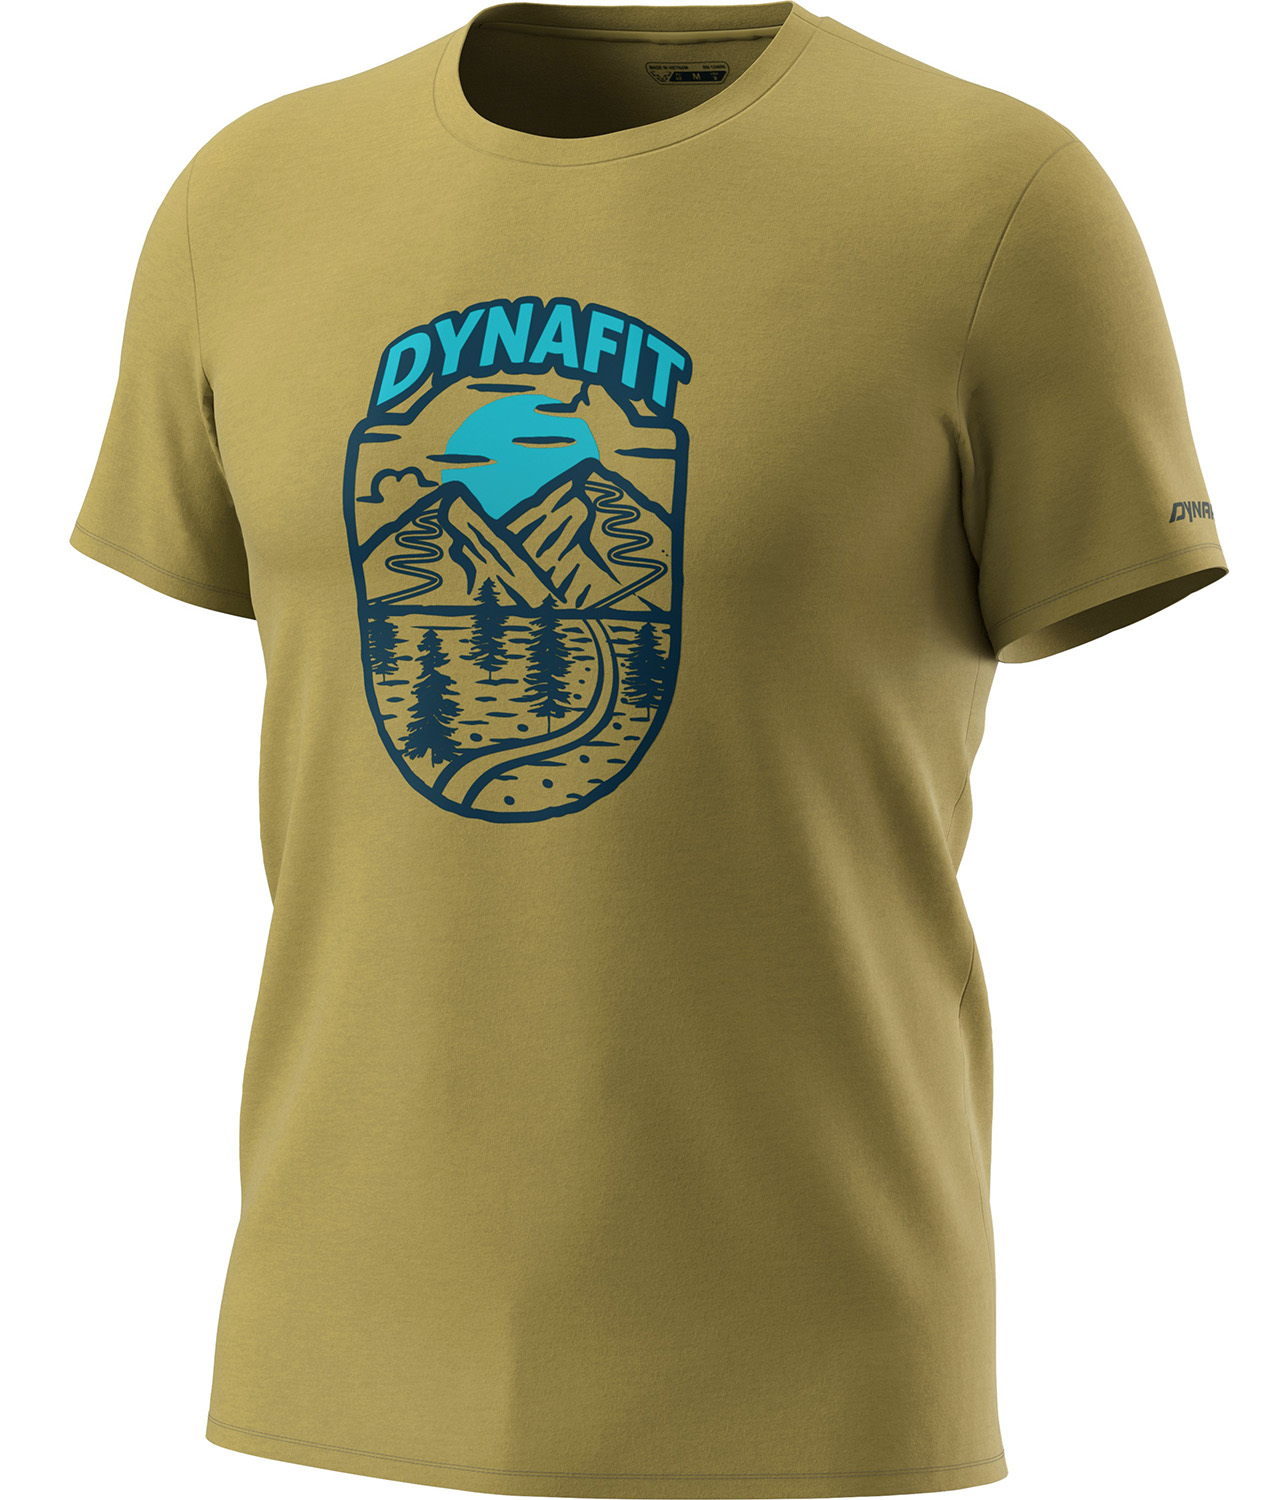 Dynafit Graphic Cotton T-Shirt Army 22551